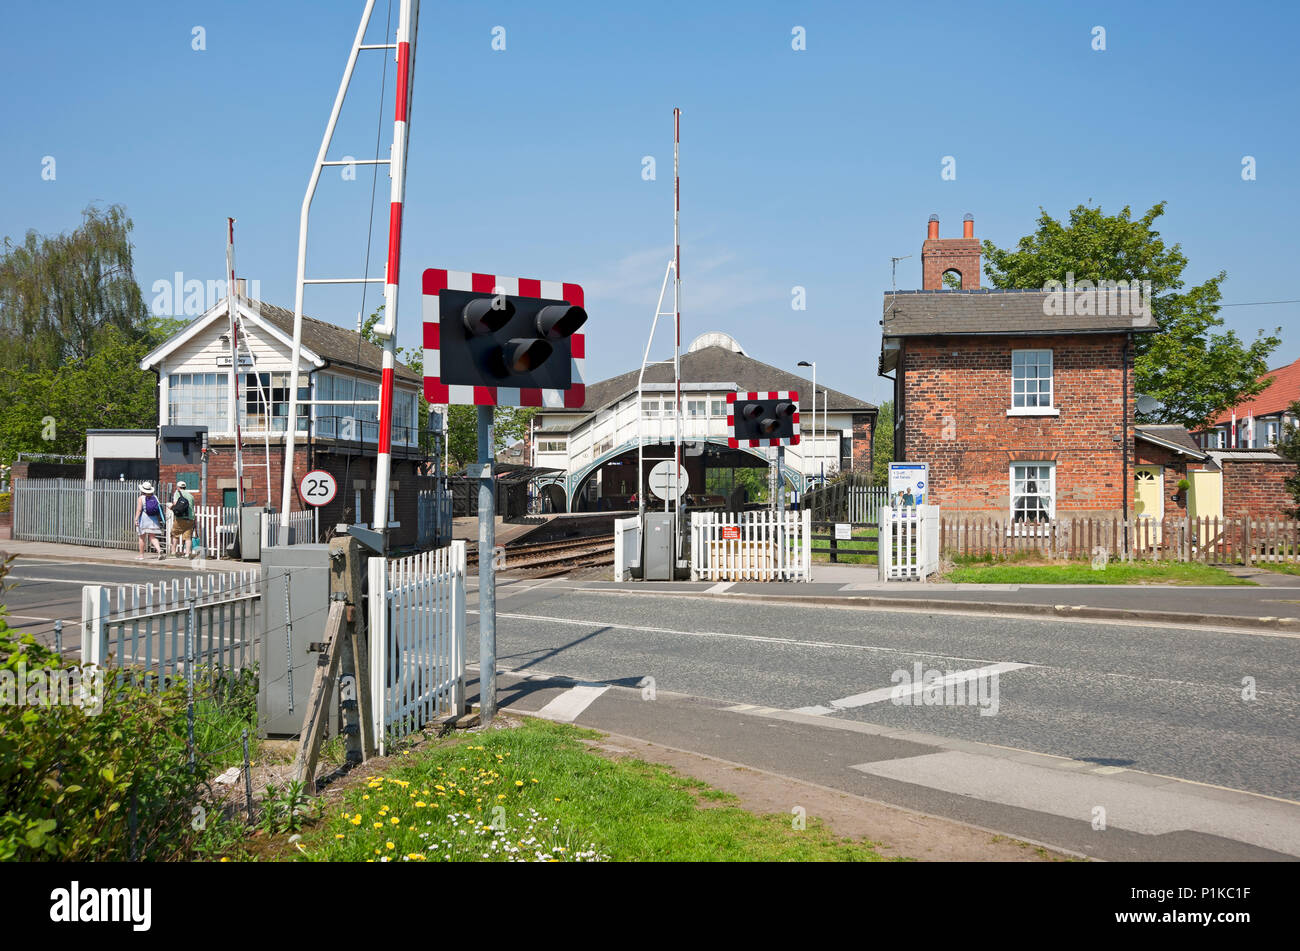 Level crossing and railway train station Beverley East Yorkshire England UK United Kingdom GB Great Britain Stock Photo